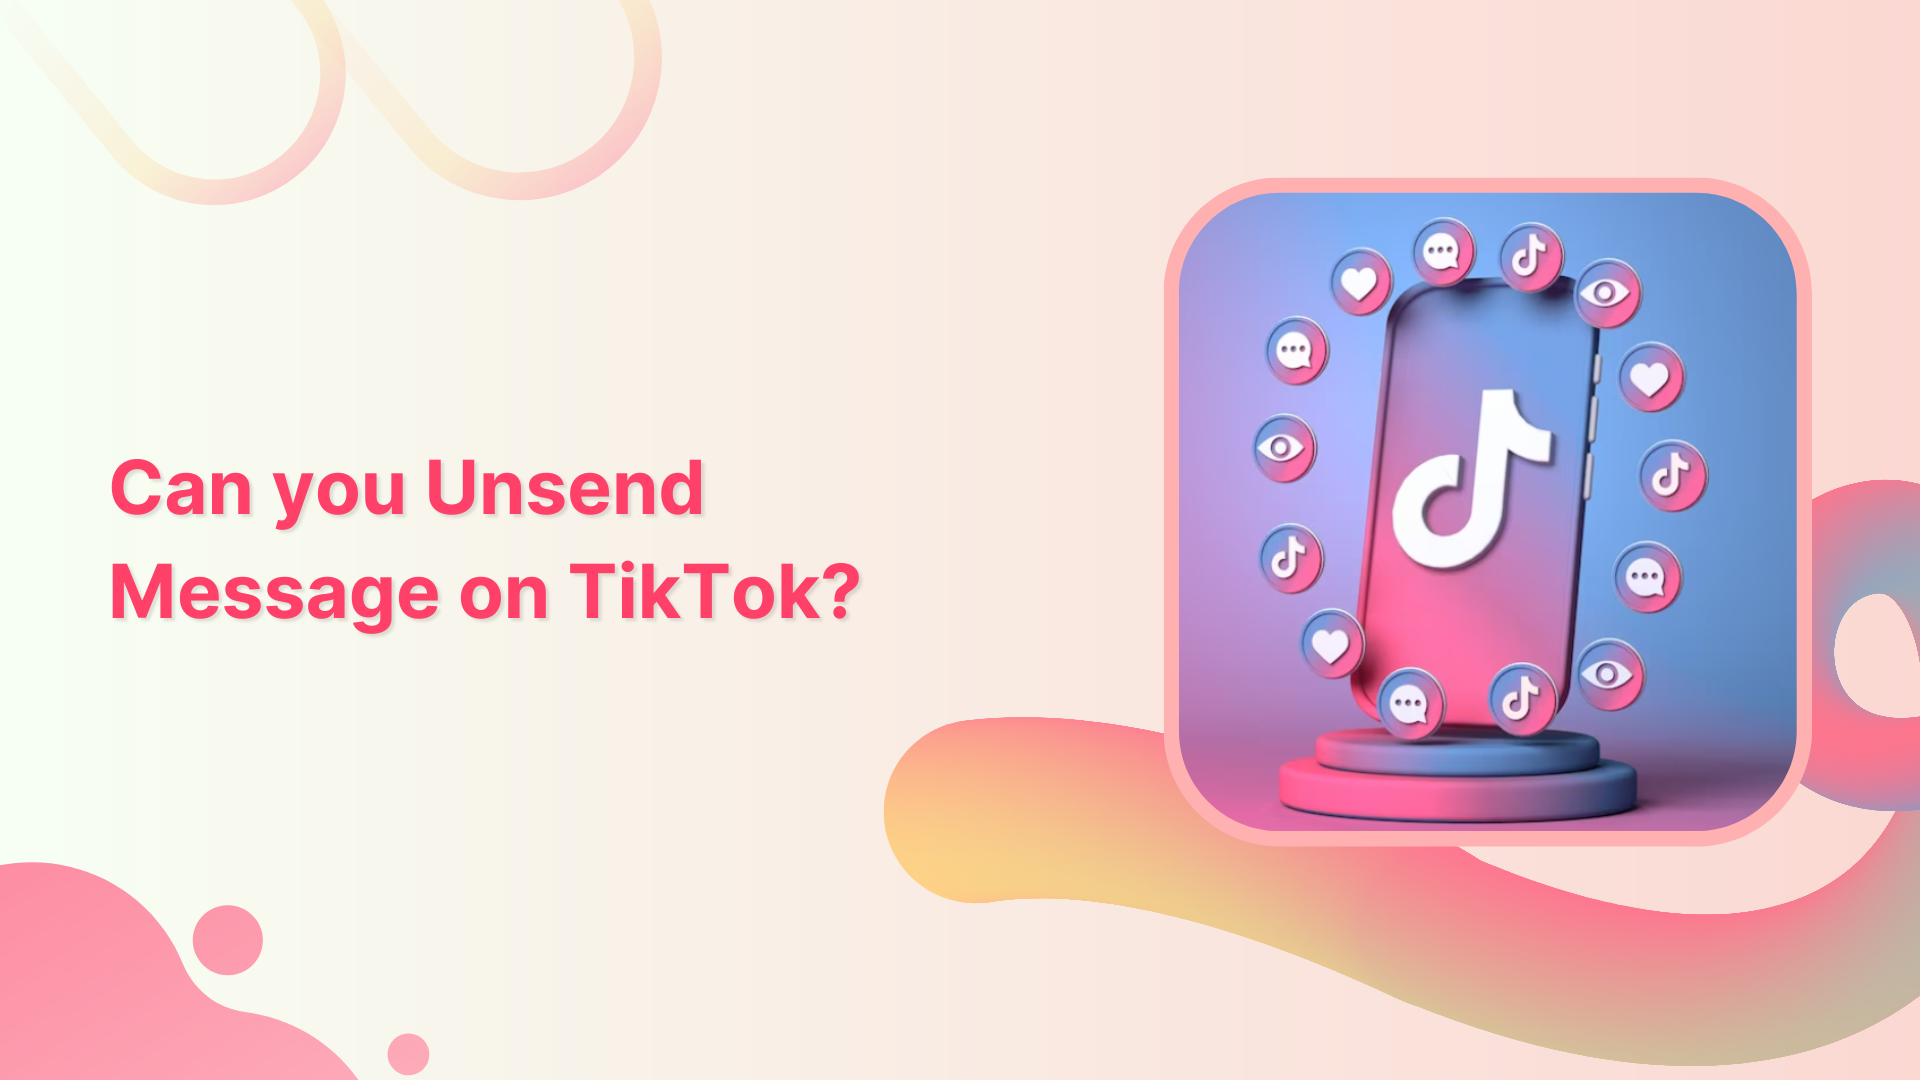 can you unsend message on TikTok